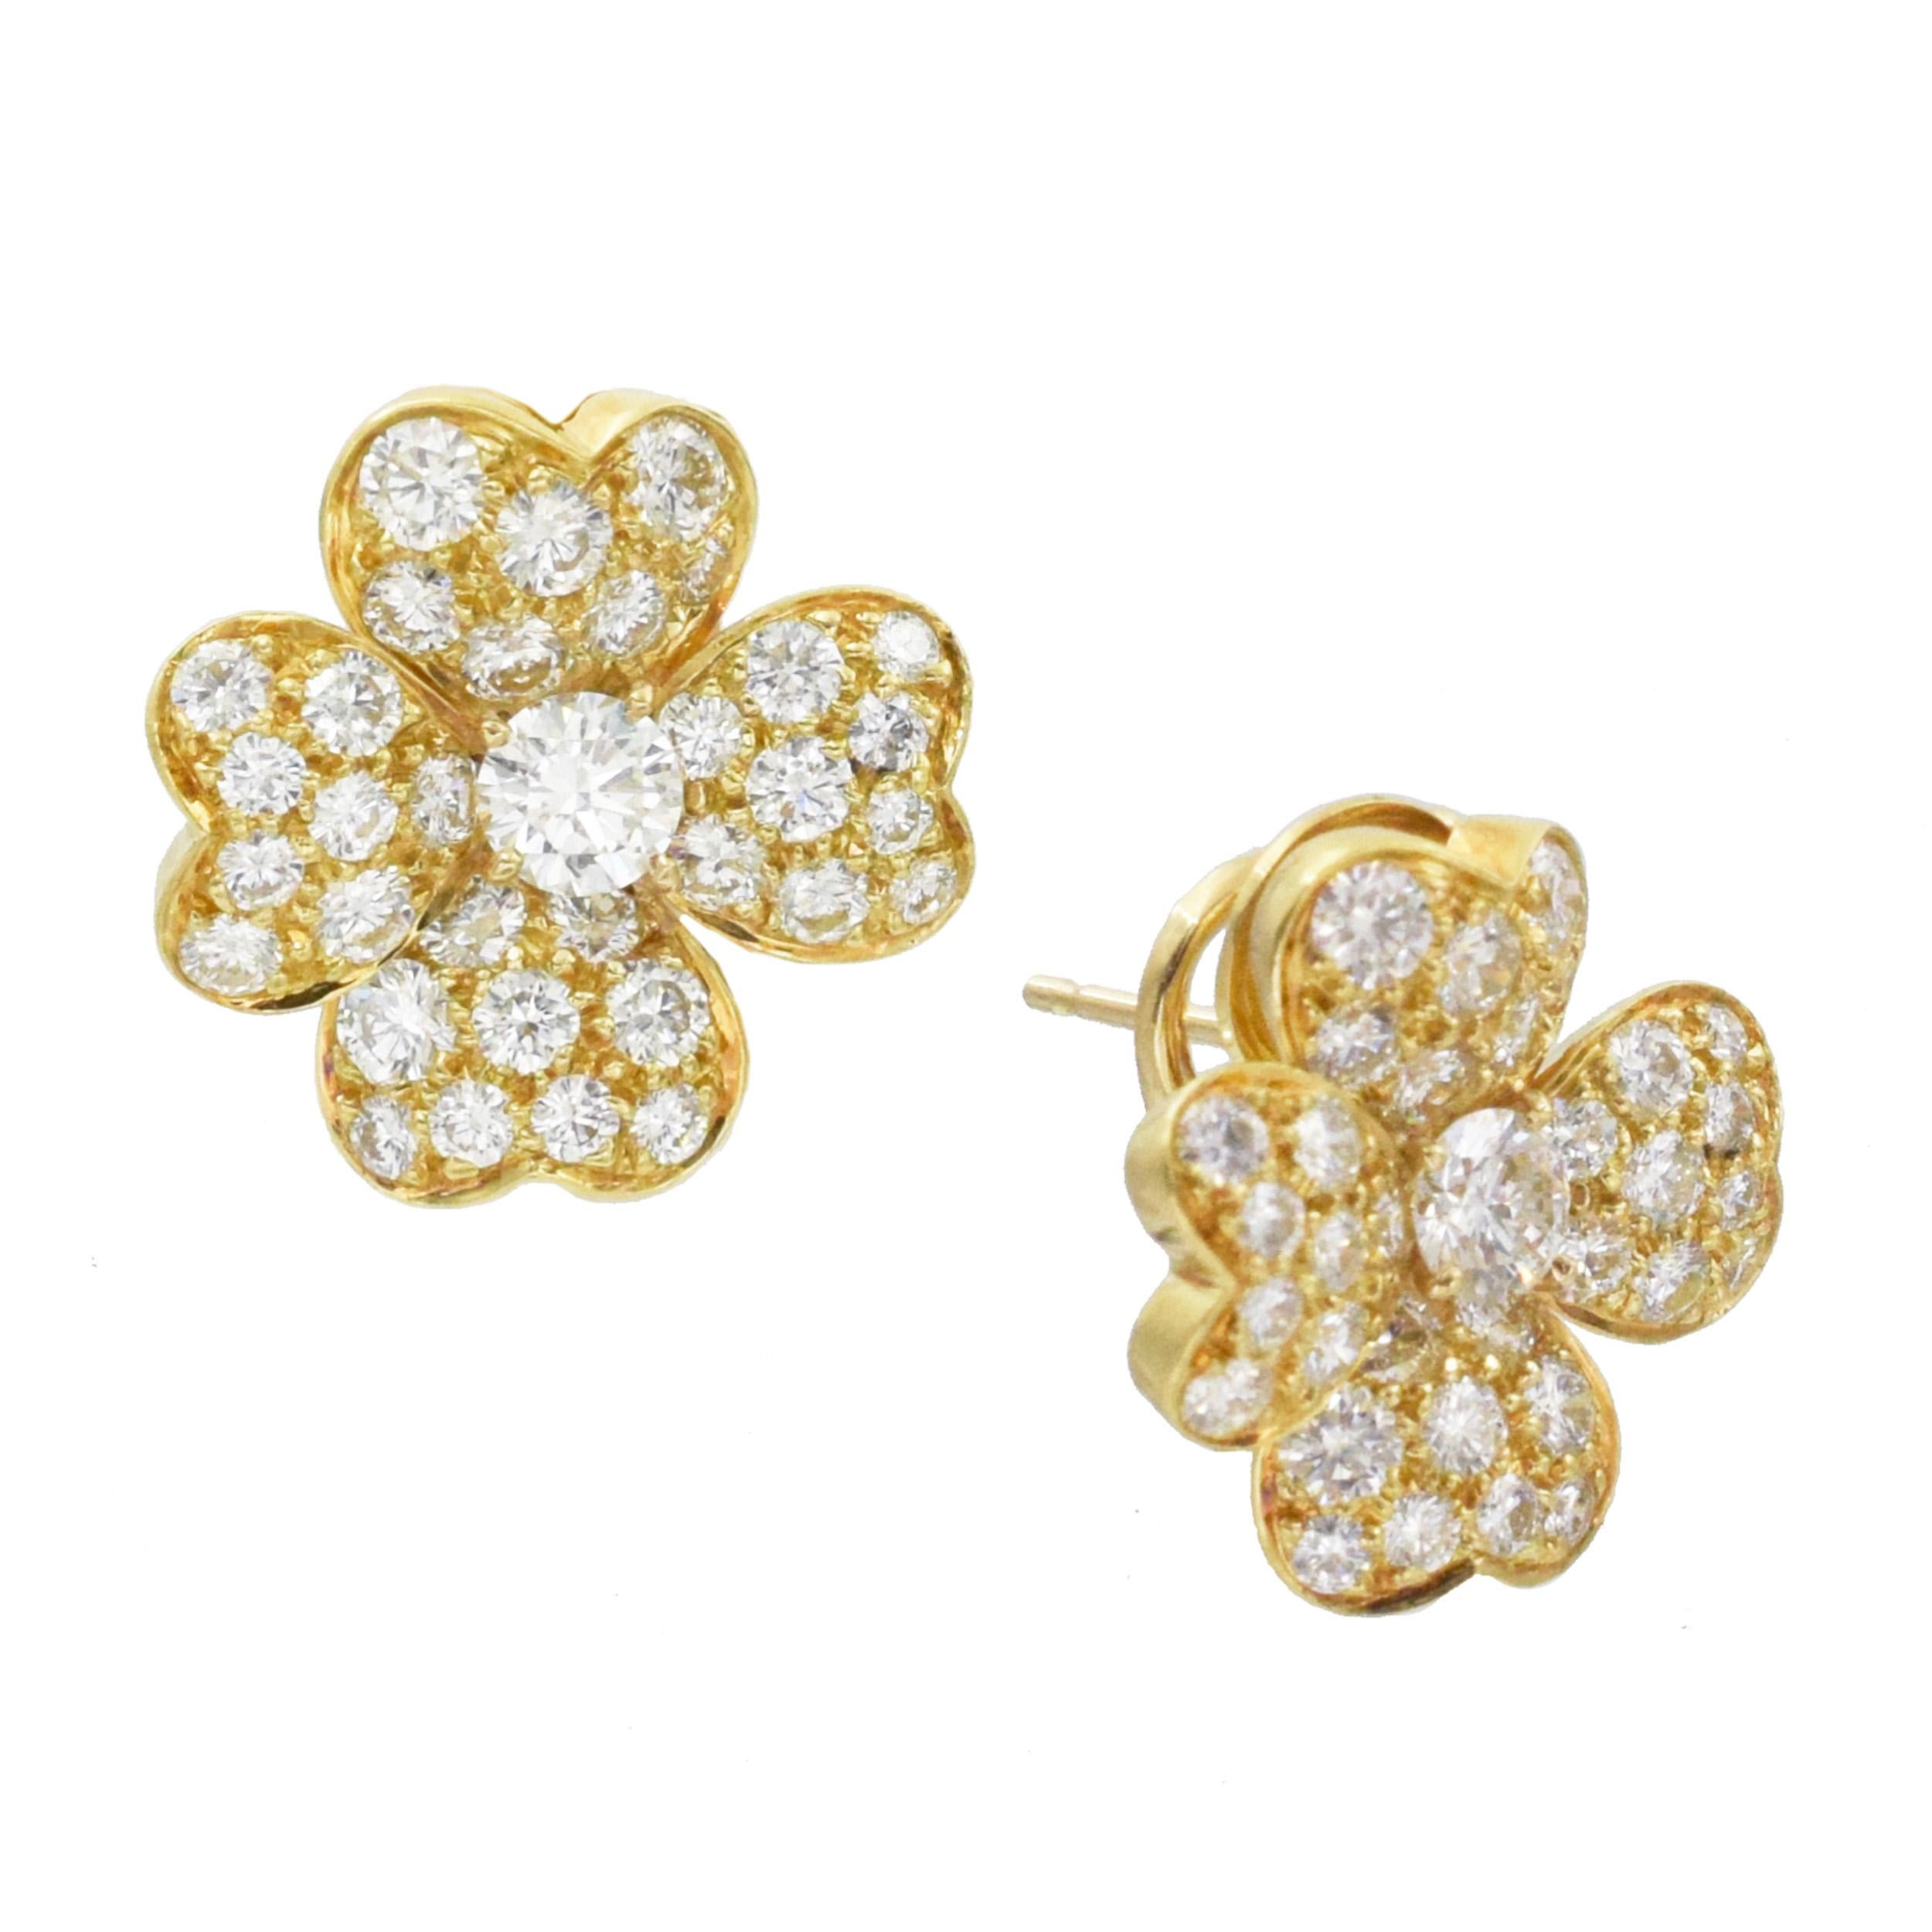 Van Cleef & Arpels 'Cosmos' Diamond and Gold Earrings. This pair of earrings has 2 clover motifs with round diamonds weight approximately 2.2ct (Color: E/F, Clarity: VS) all set in
18k yellow gold. The earrings has post with omega backs. Signed Van